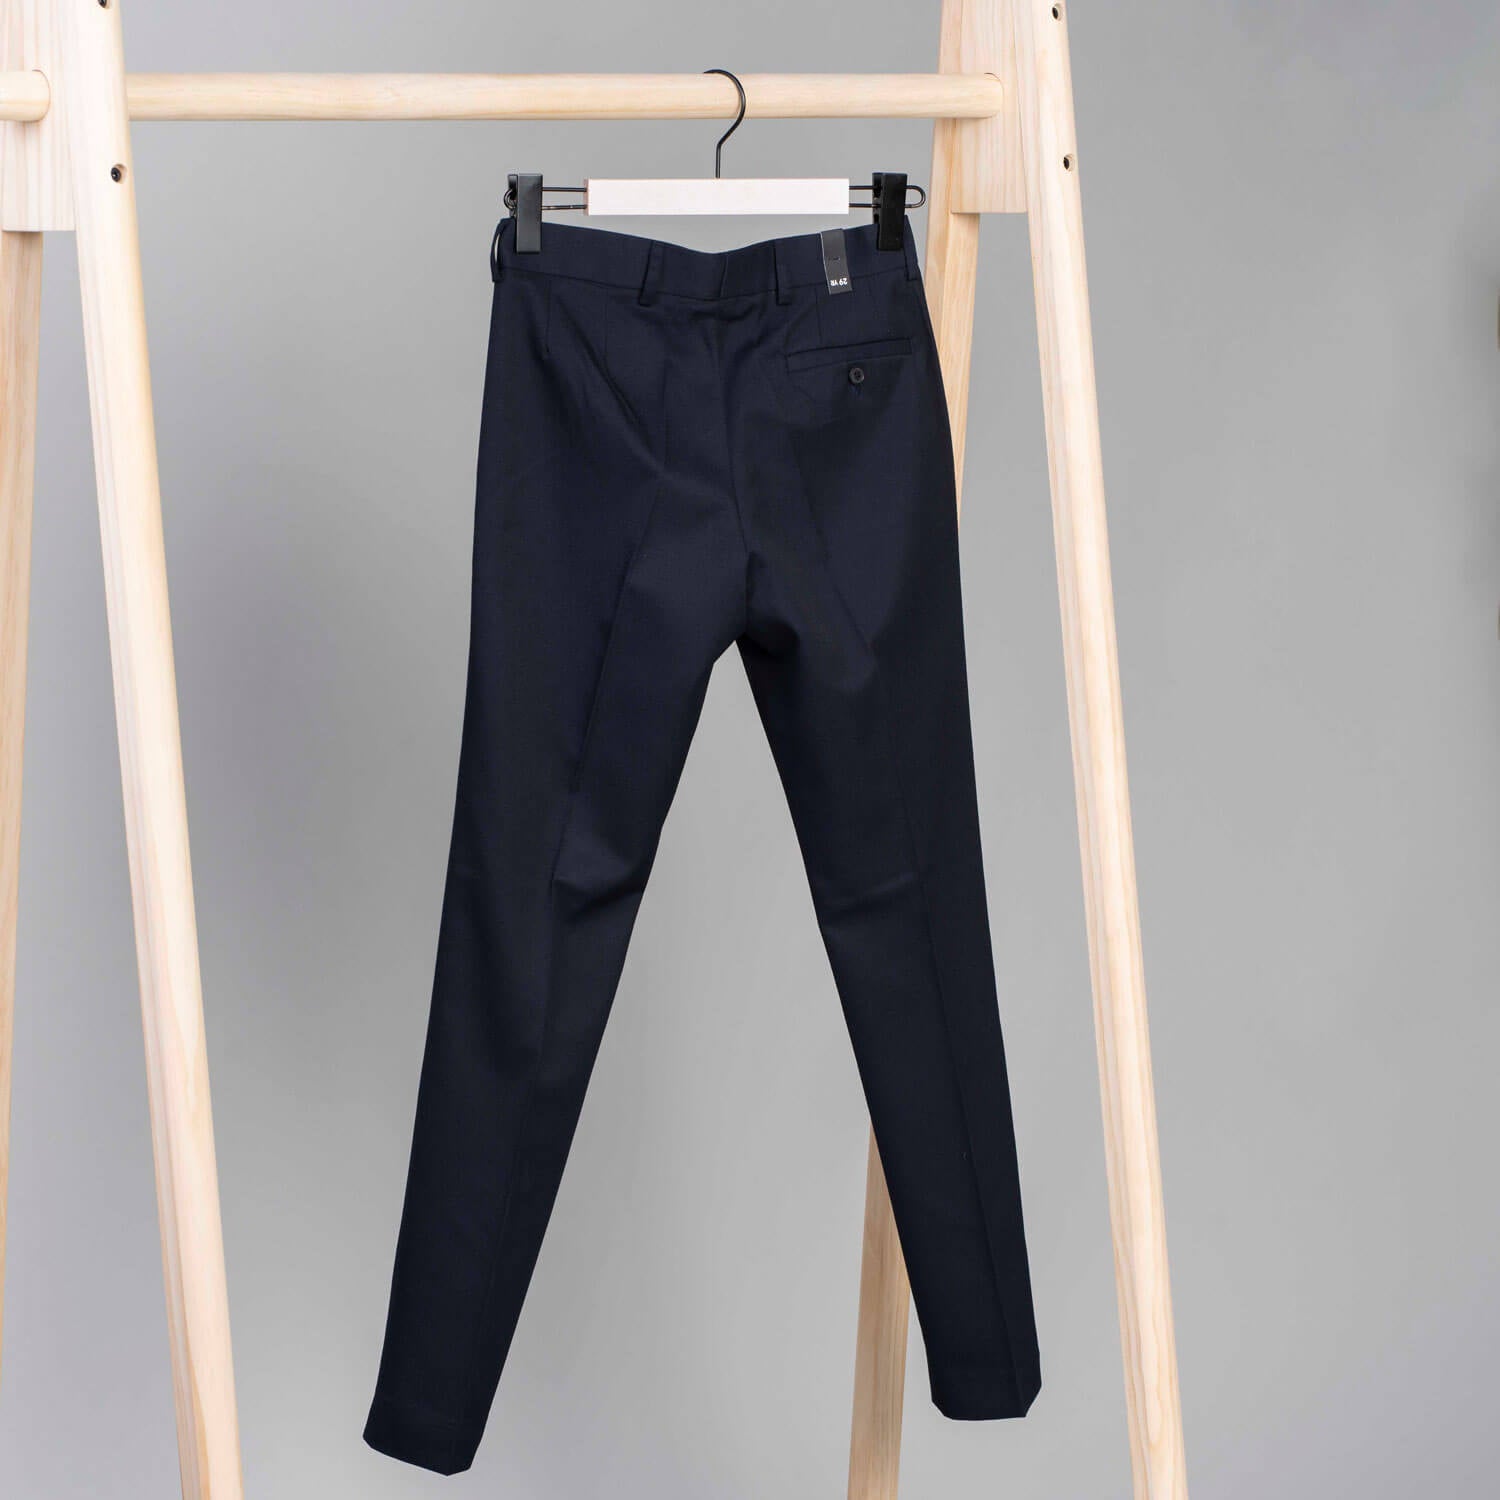 Blue Dot Boys Slimfit Trousers - Navy 2 Shaws Department Stores